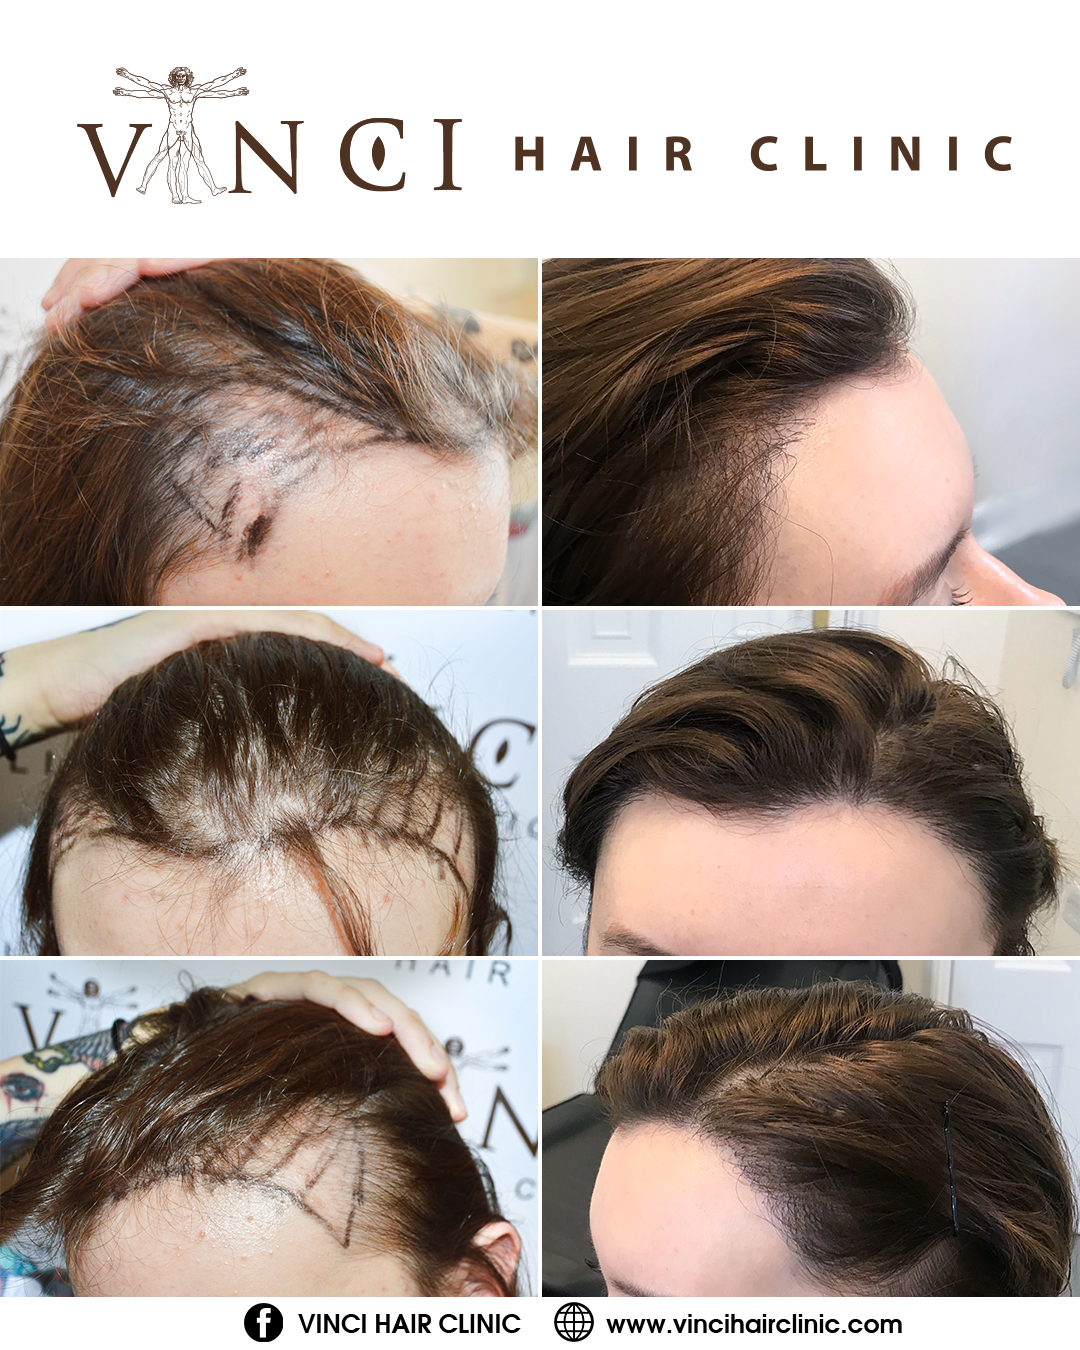 Parietal scalp is another affected area in female pattern hair loss: a |  CCID